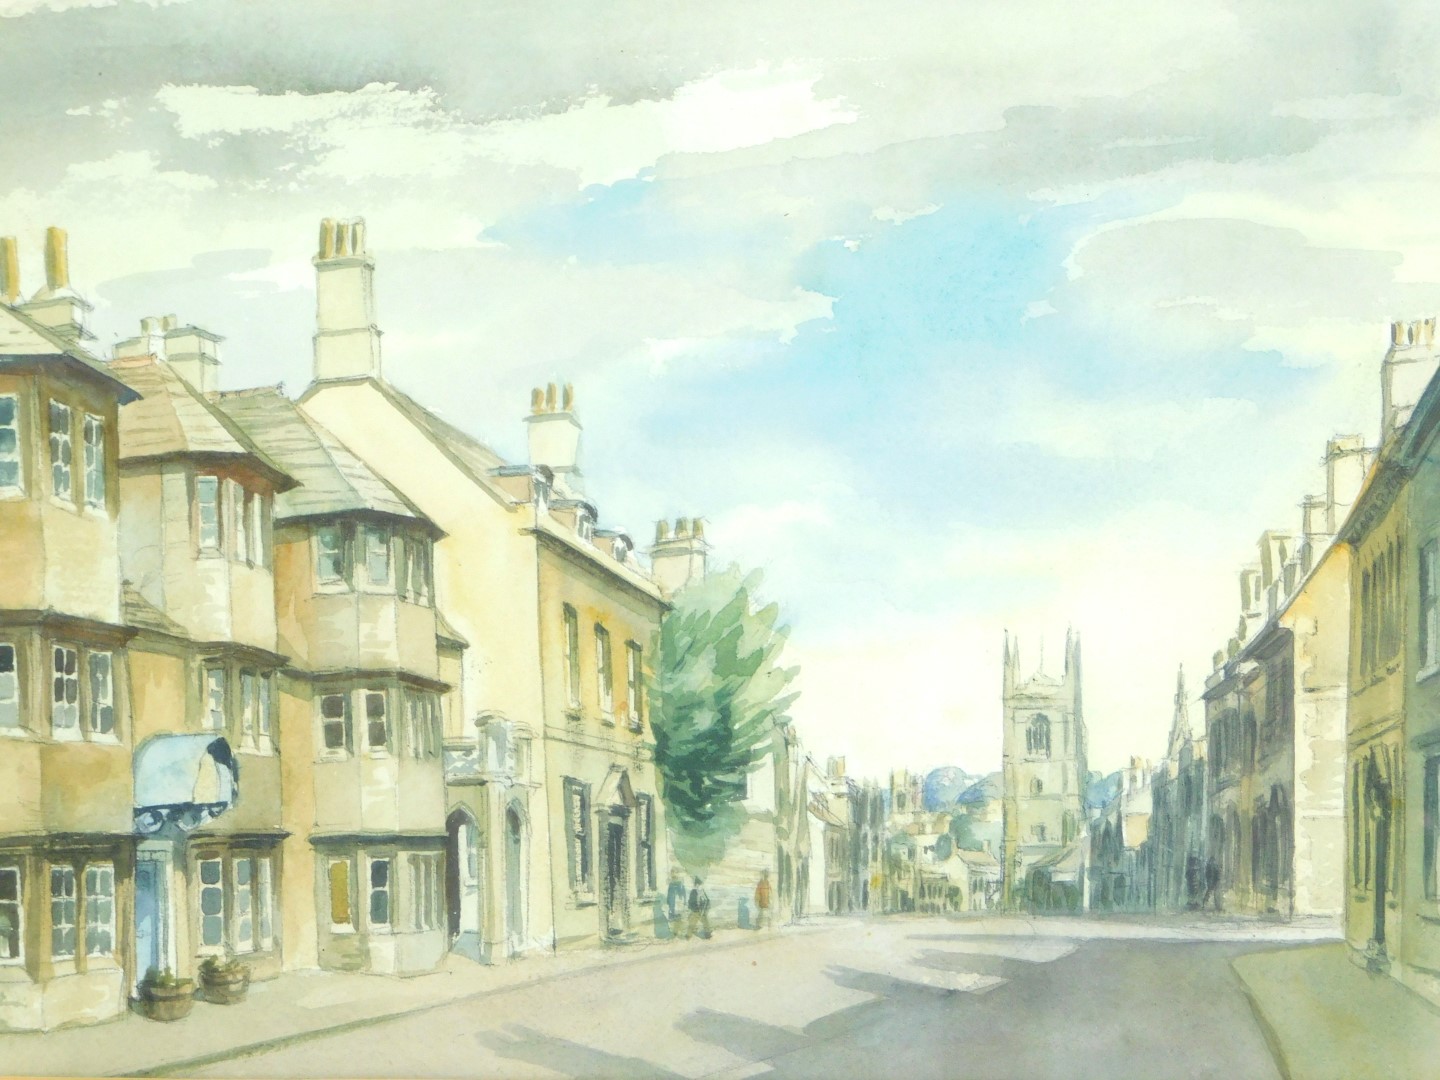 Gladys Rees Teesdale (British, 1898-1985). St Martins, Stamford, watercolour, attributed verso, 27cm